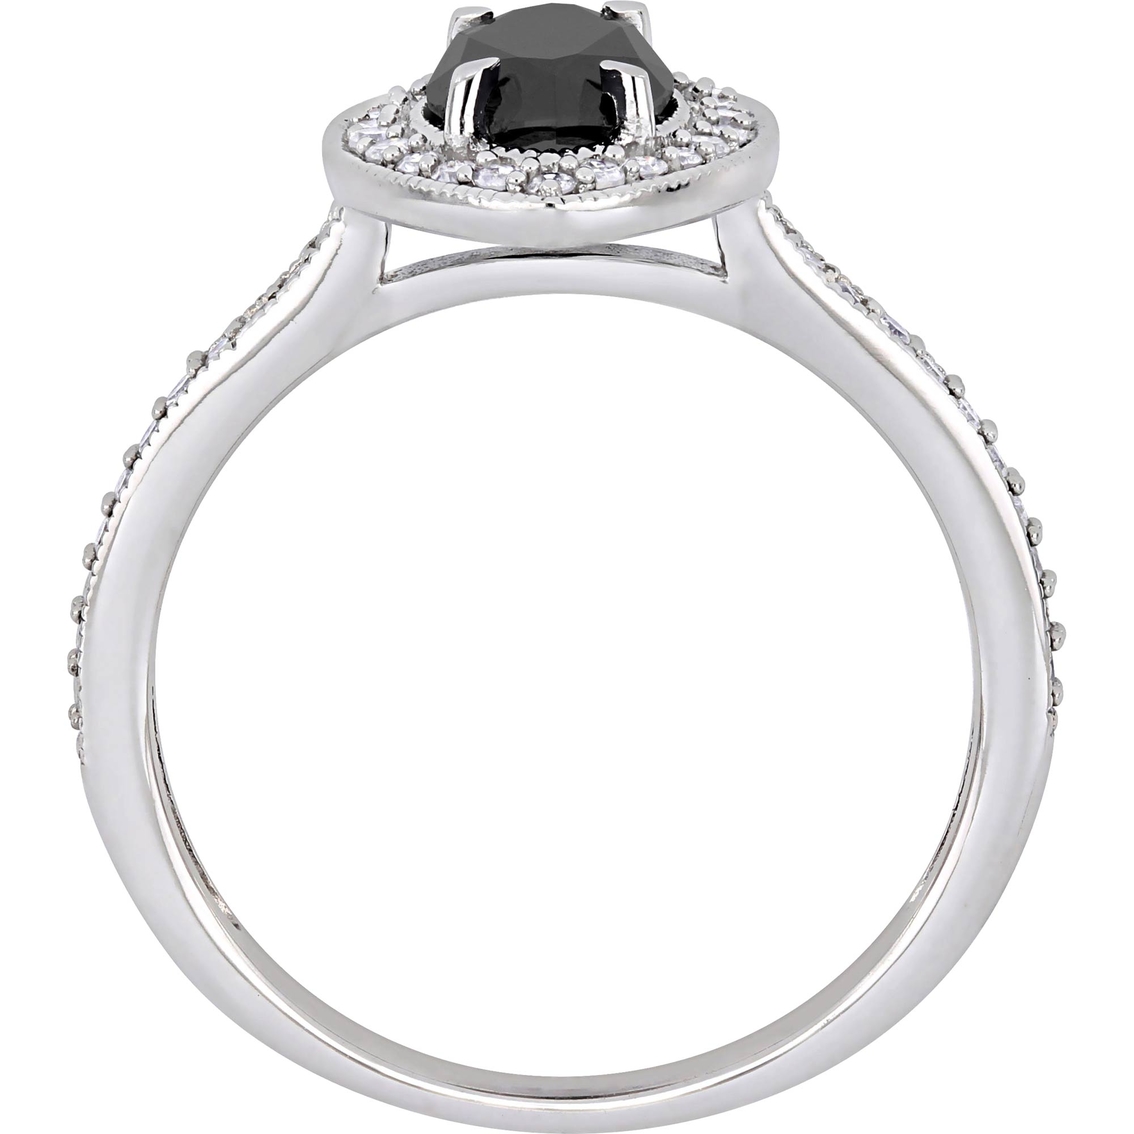 Diamore 10K White Gold 1 1/4 CTW Black and White Diamond Marquise Halo Ring - Image 3 of 4